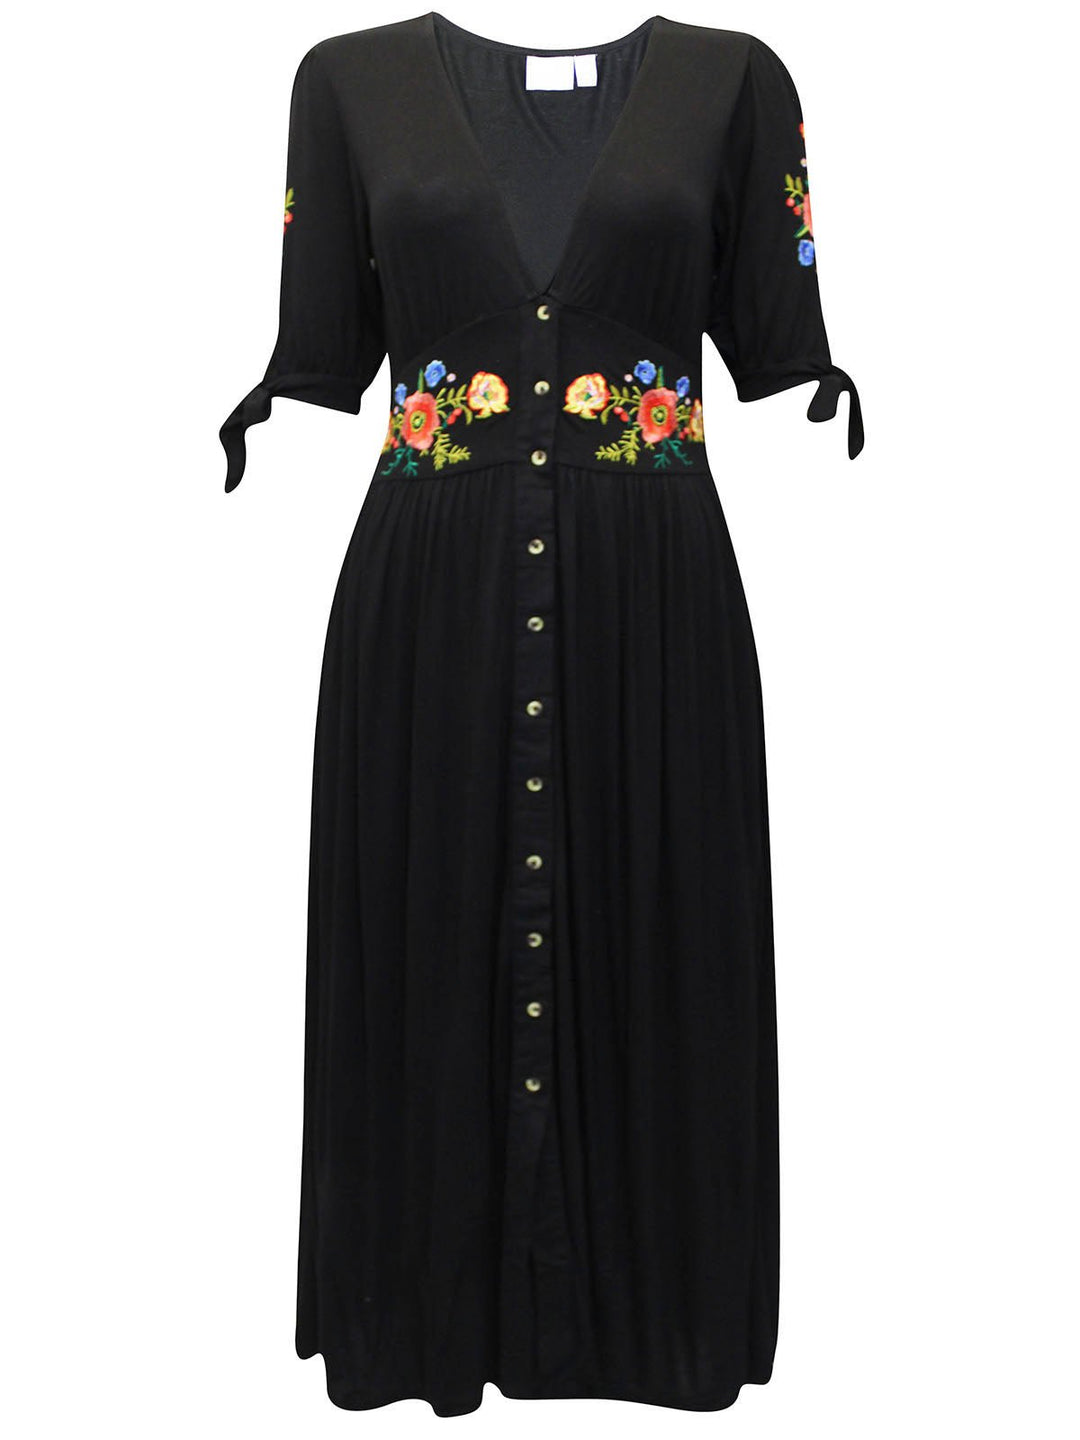 Black Plus Size Short Sleeve Button Down Floral Embroidered Dress - Curvy Chic Boutique